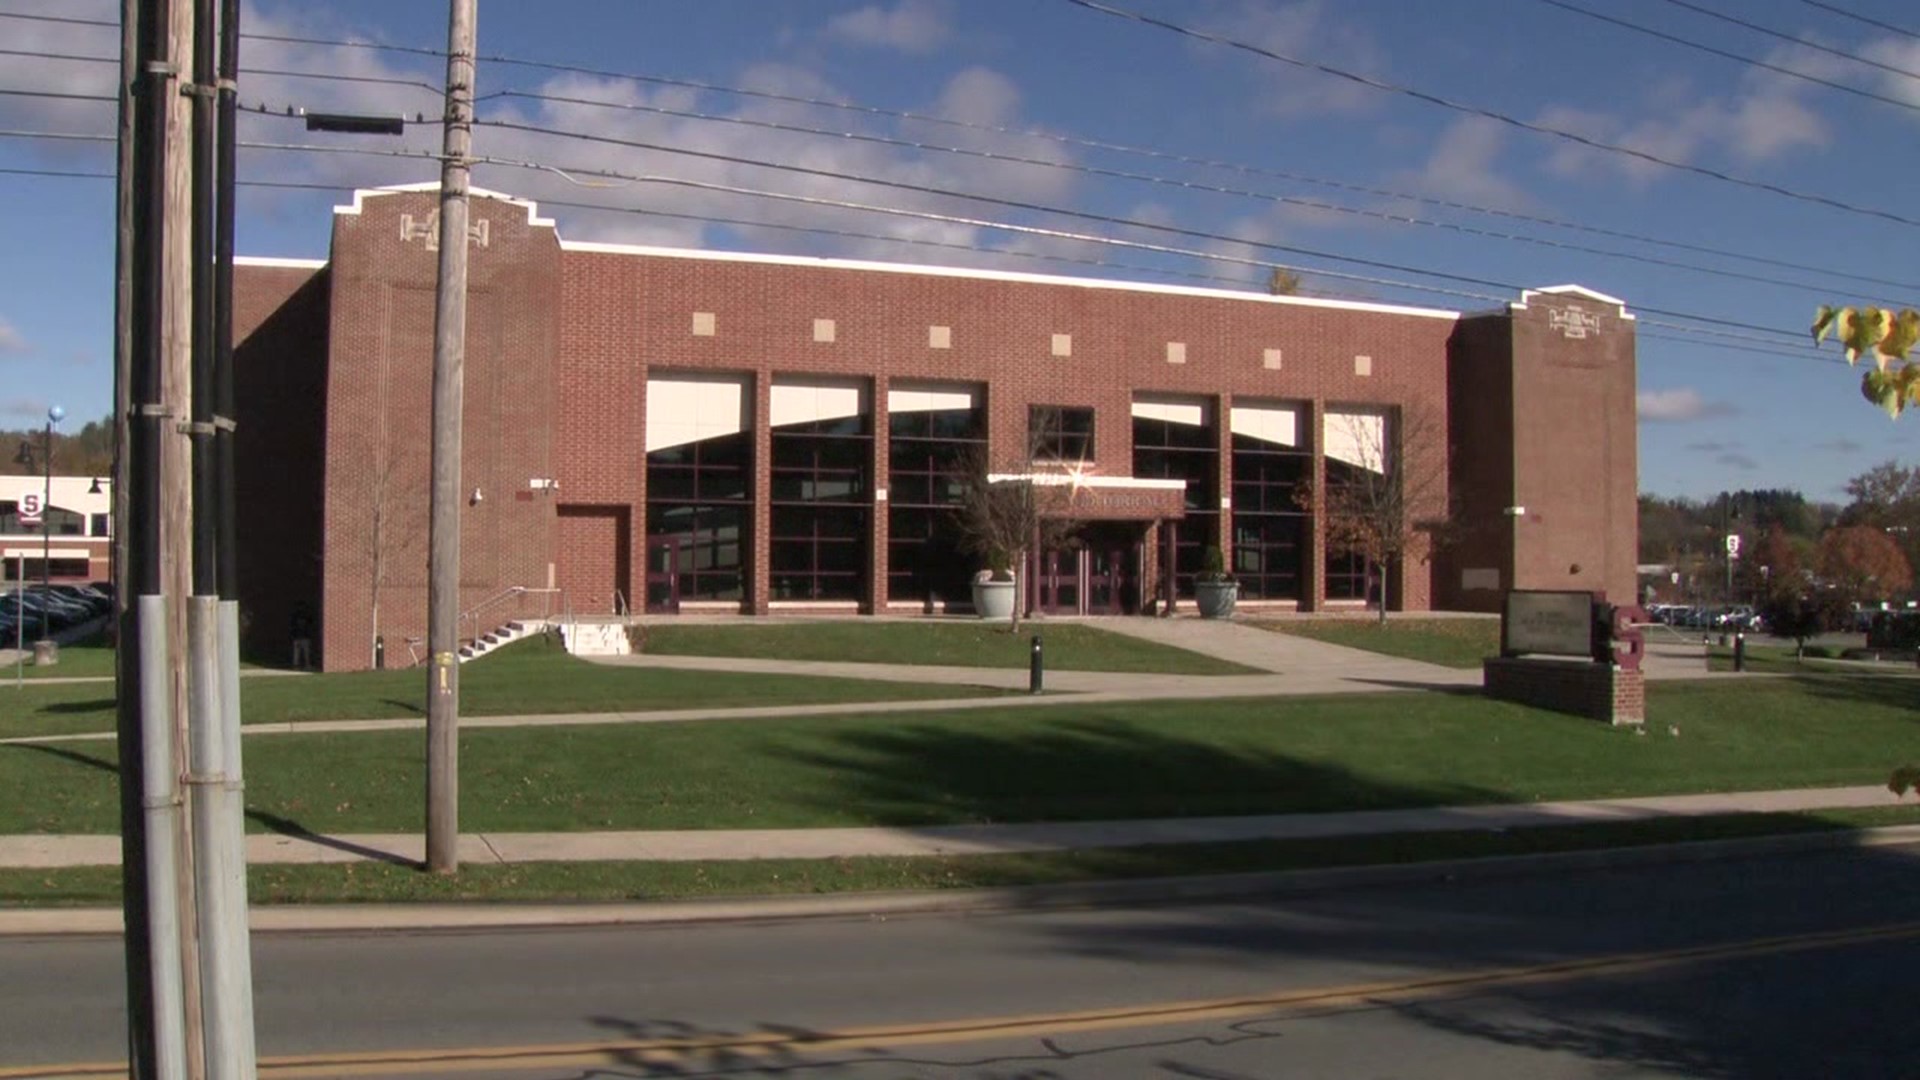 A student was taken into police custody on Monday after being found with a weapon inside Stroudsburg High School, police say